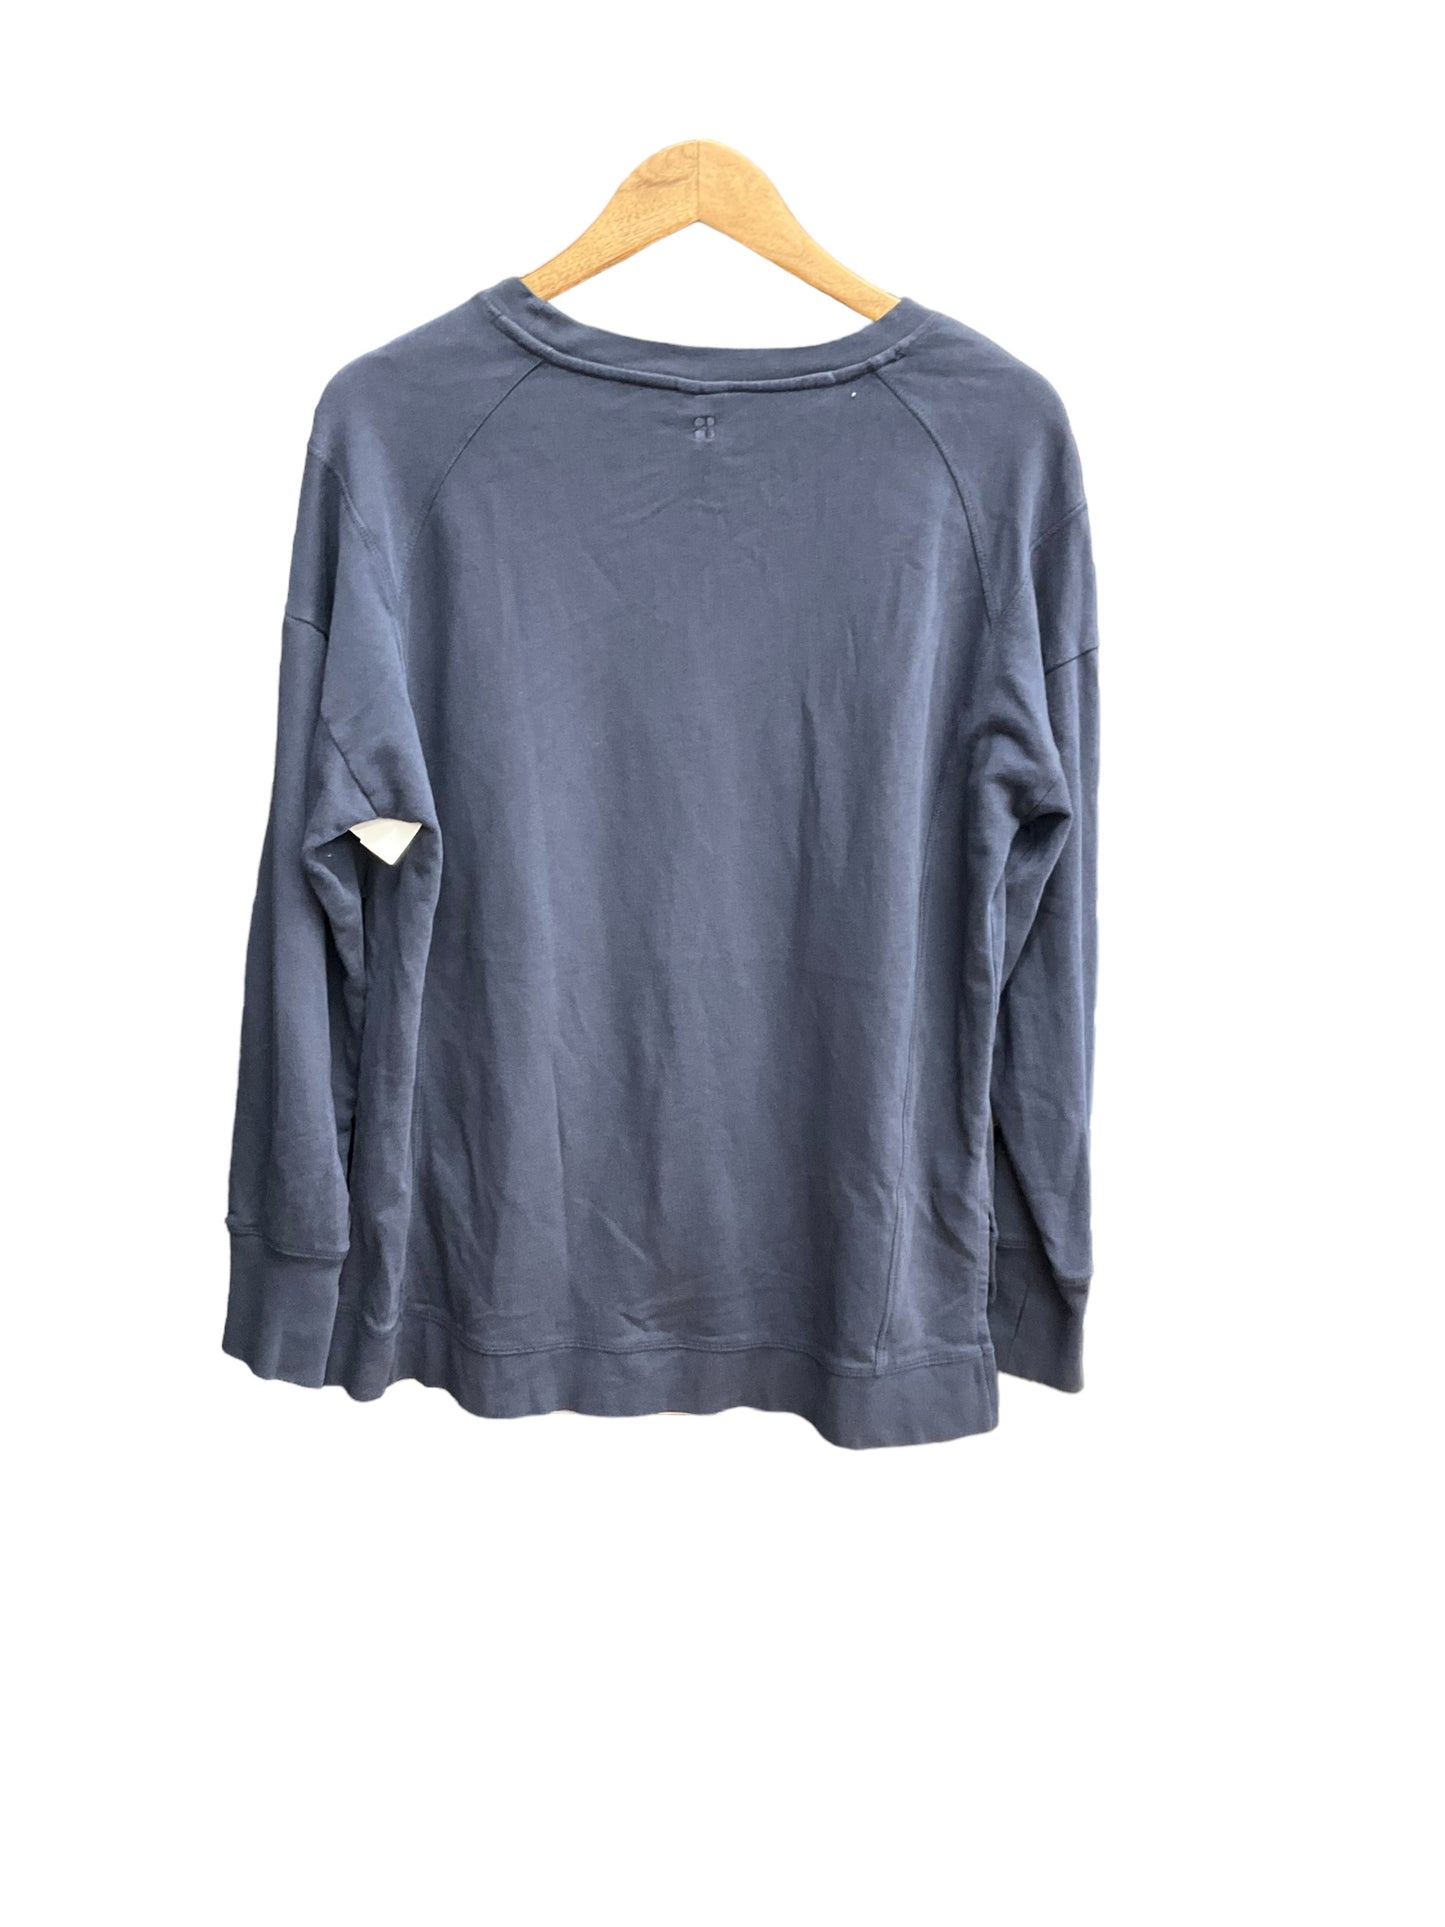 Athletic Top Long Sleeve Crewneck By Sweaty Betty  Size: S